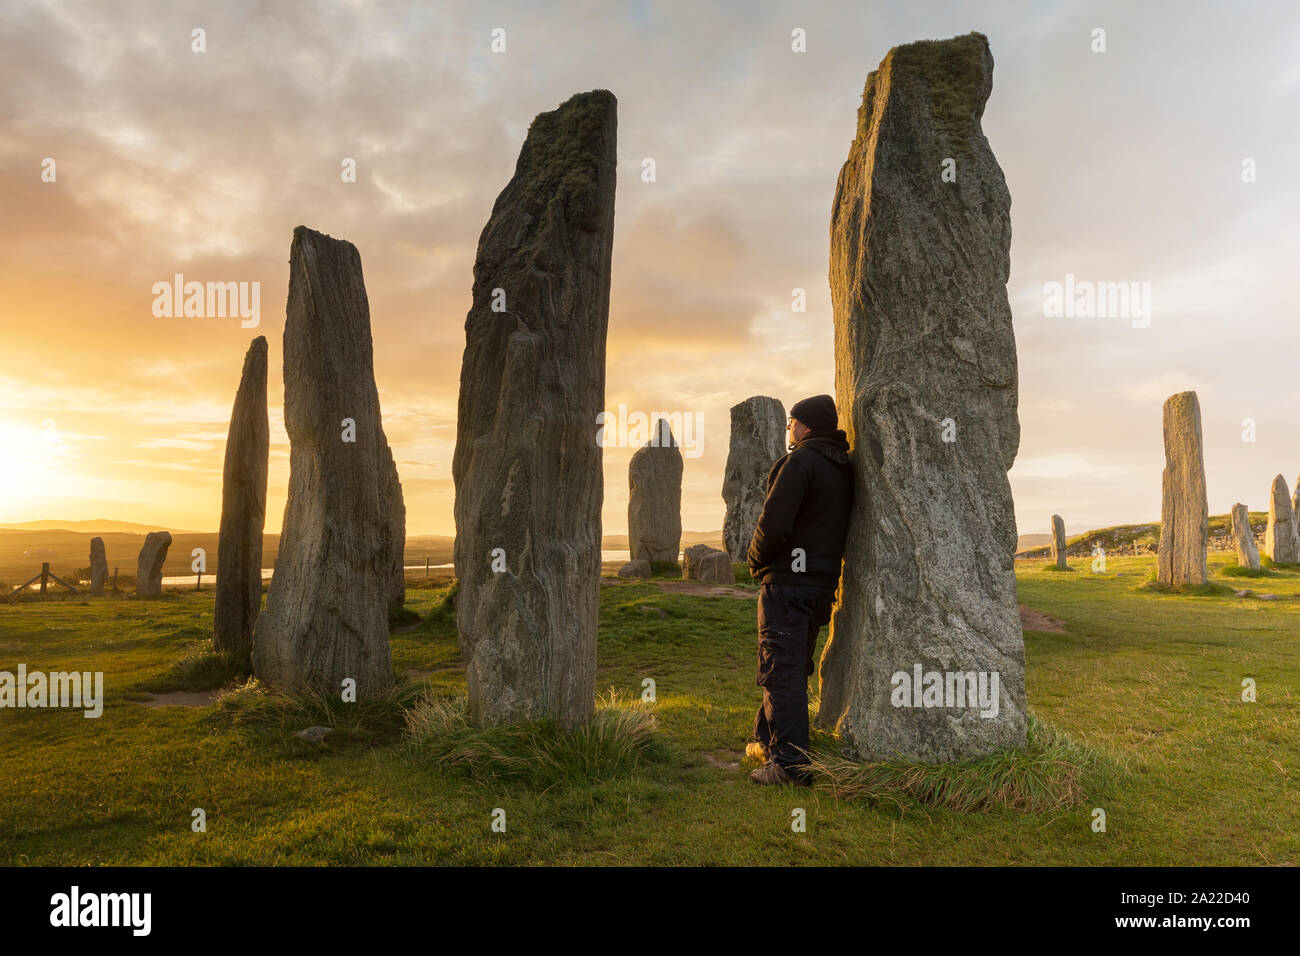 A man stands among the Callanish stone circle, a neolithic site of historical importance on the isle of Lewis, Scotland. Stock Photo